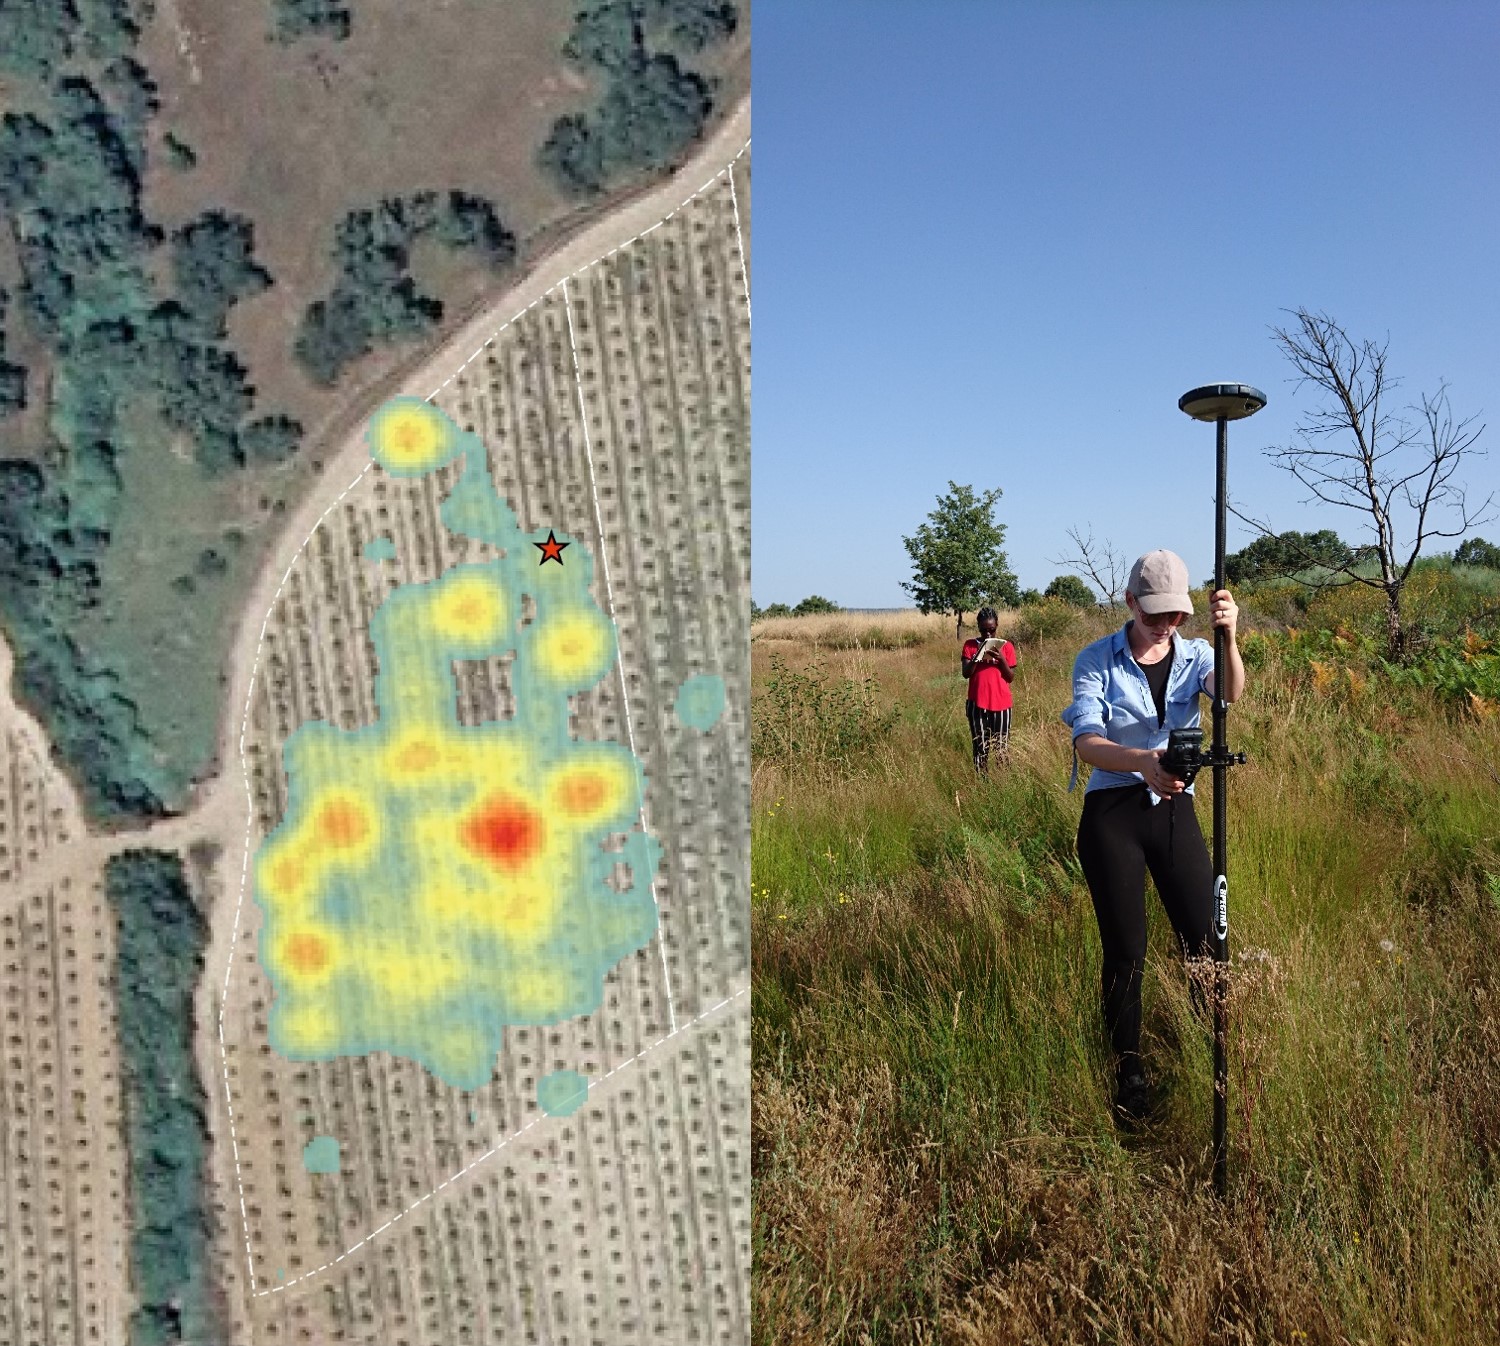 Split image; on the right a GPS survey underway in the field; on the left a satellite image overlaid with site distribution data